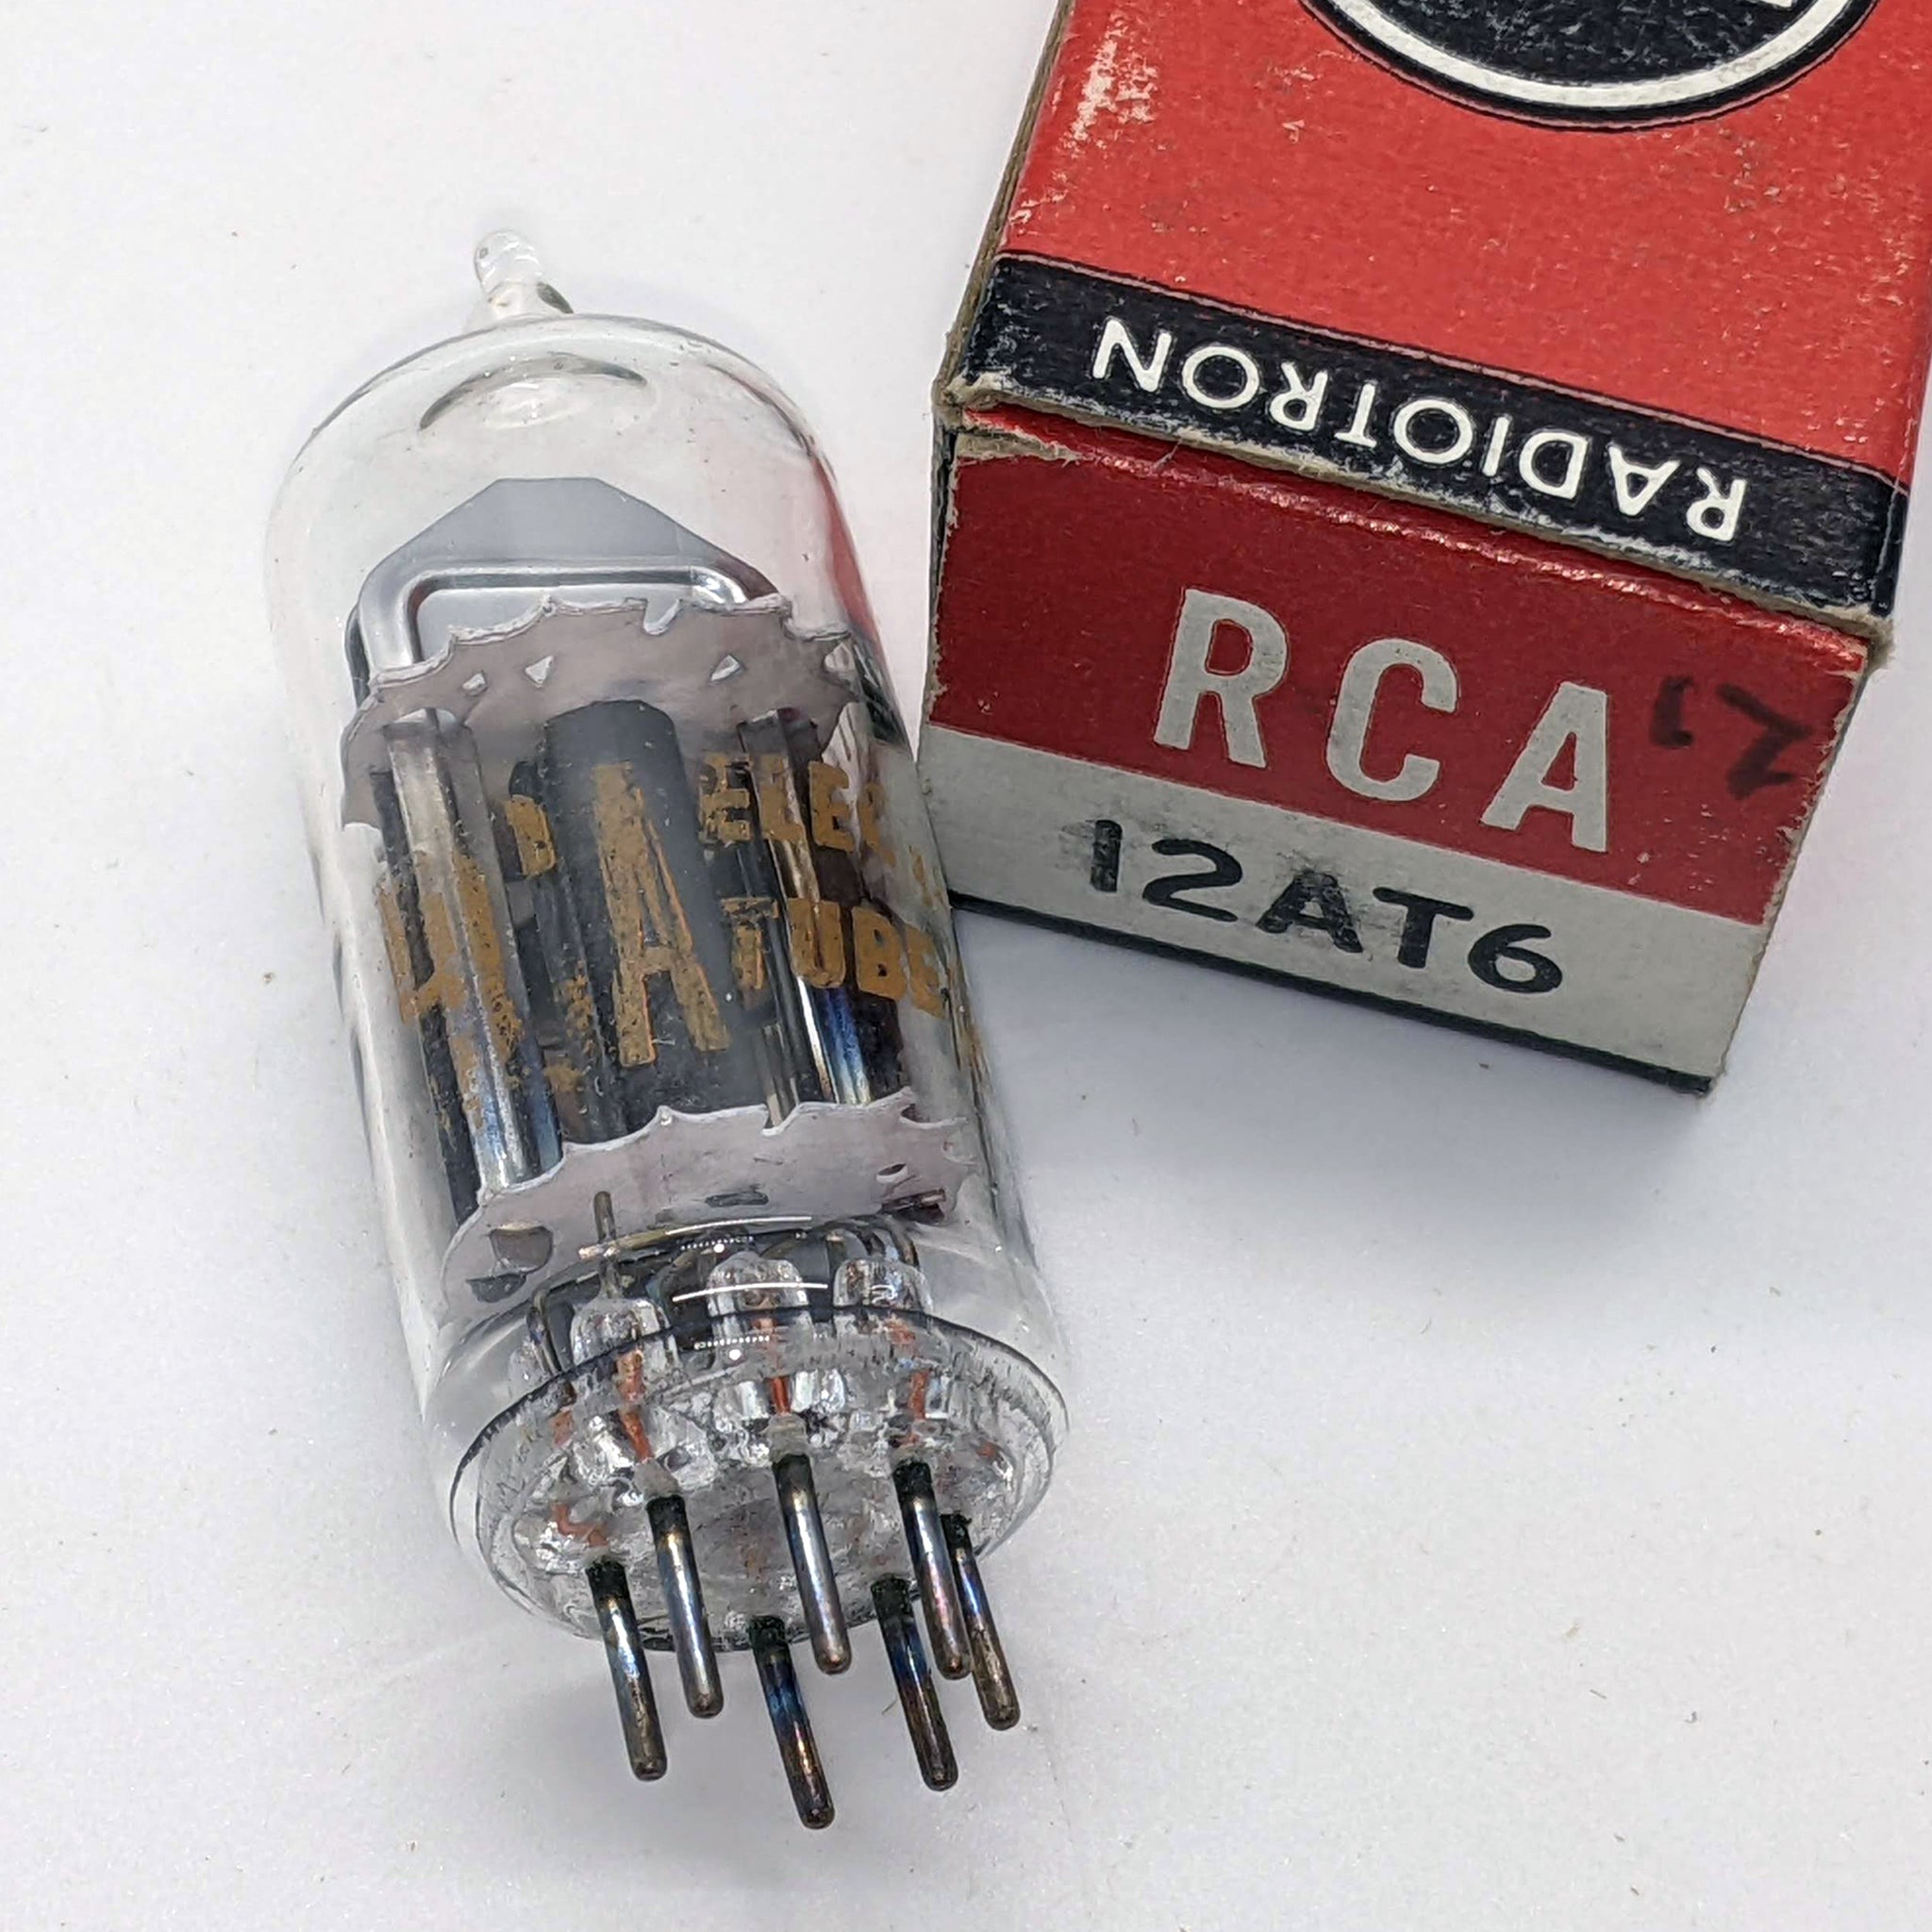 RCA 12AT6 NOS 1962 Tube,  Hickok Tested Good (3 Tests)